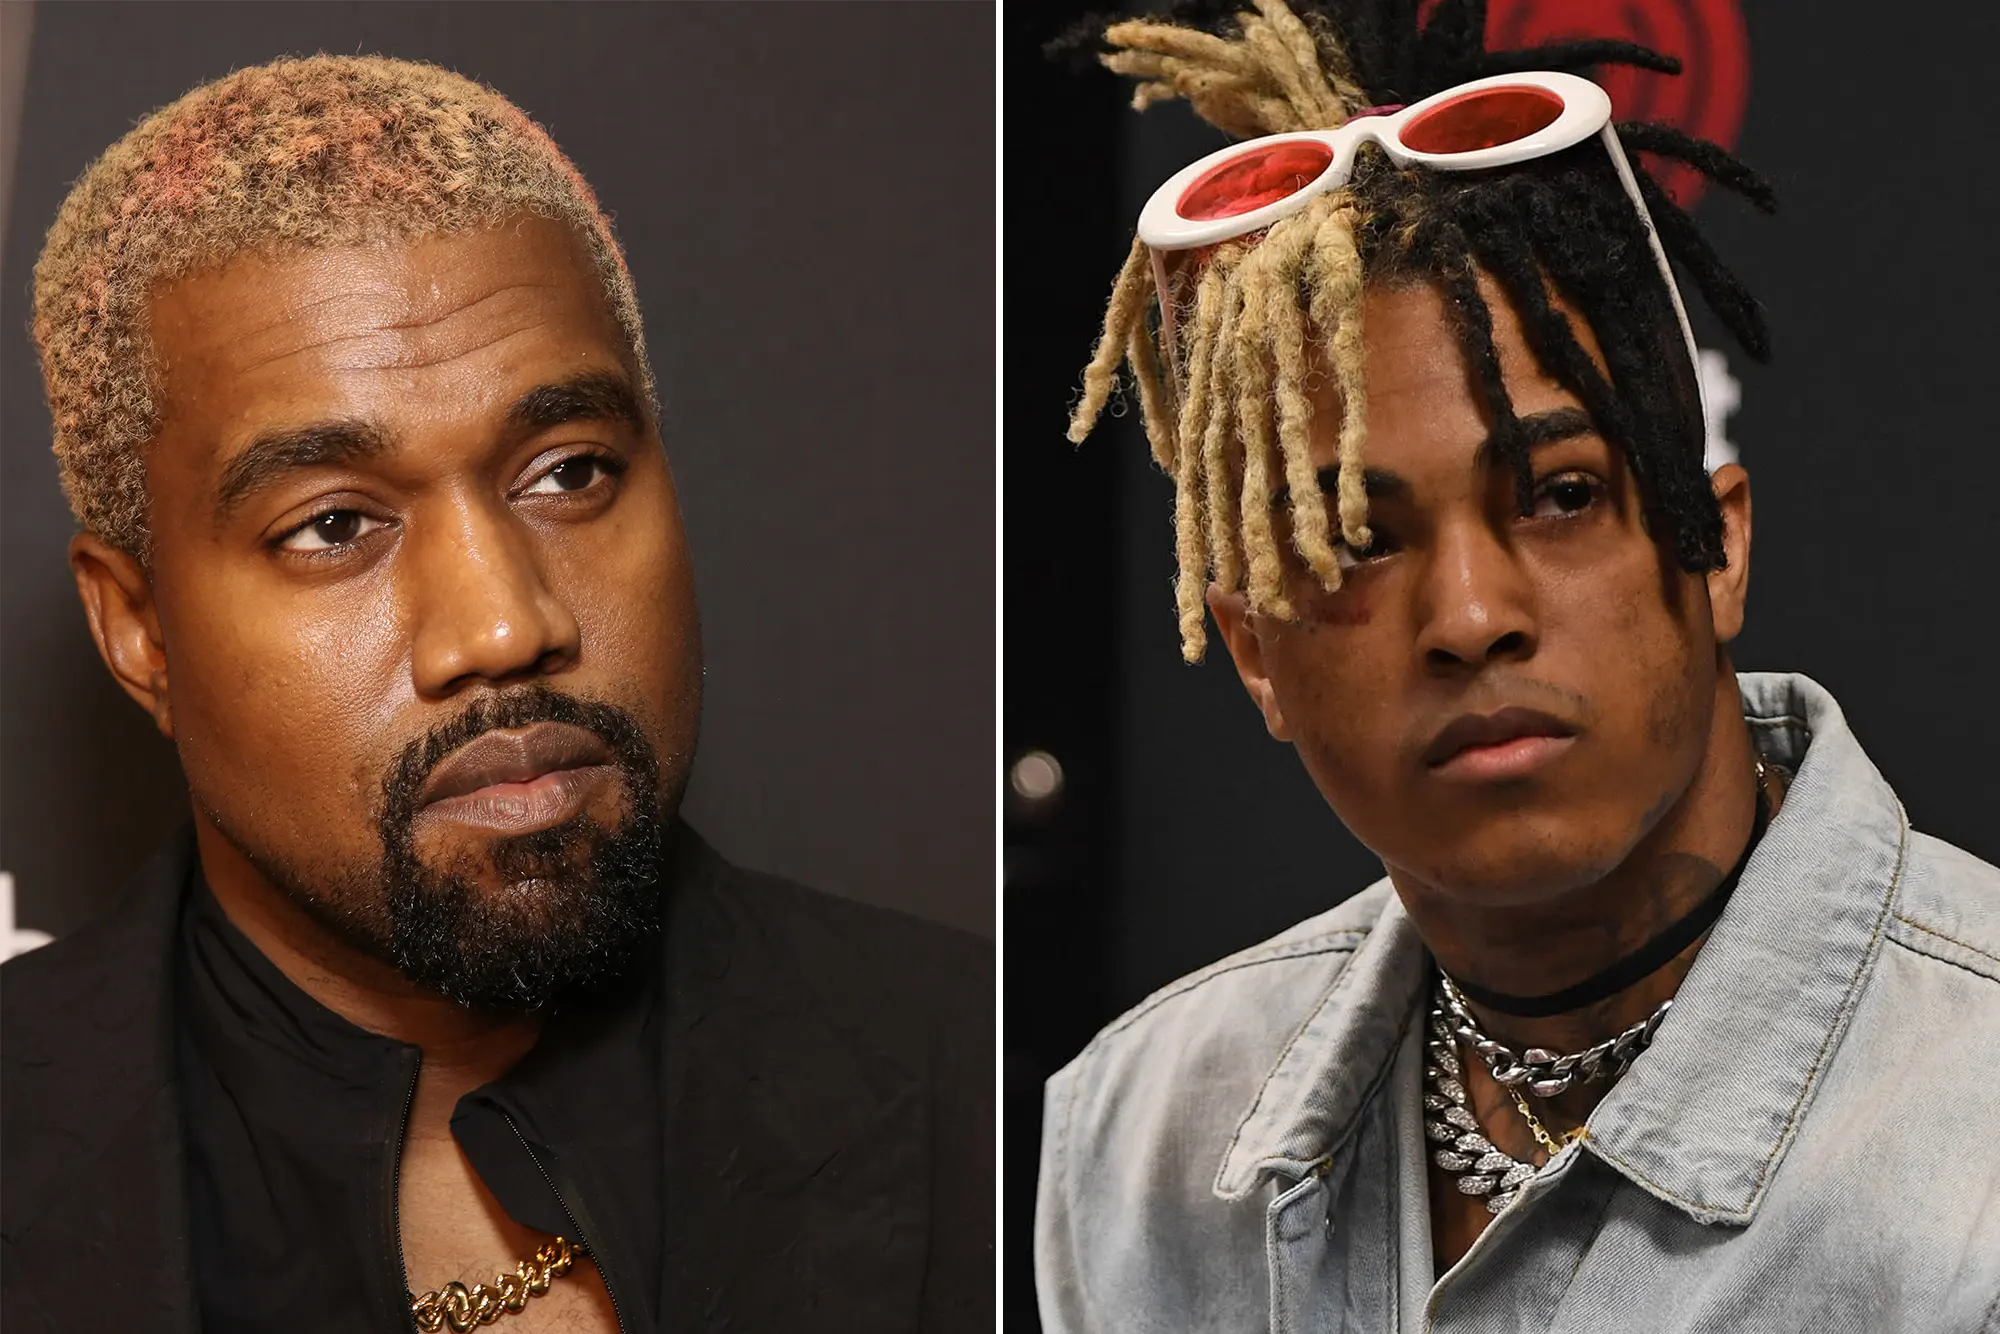 True Love (Kanye West and XXXTentacion song) - Wikipedia